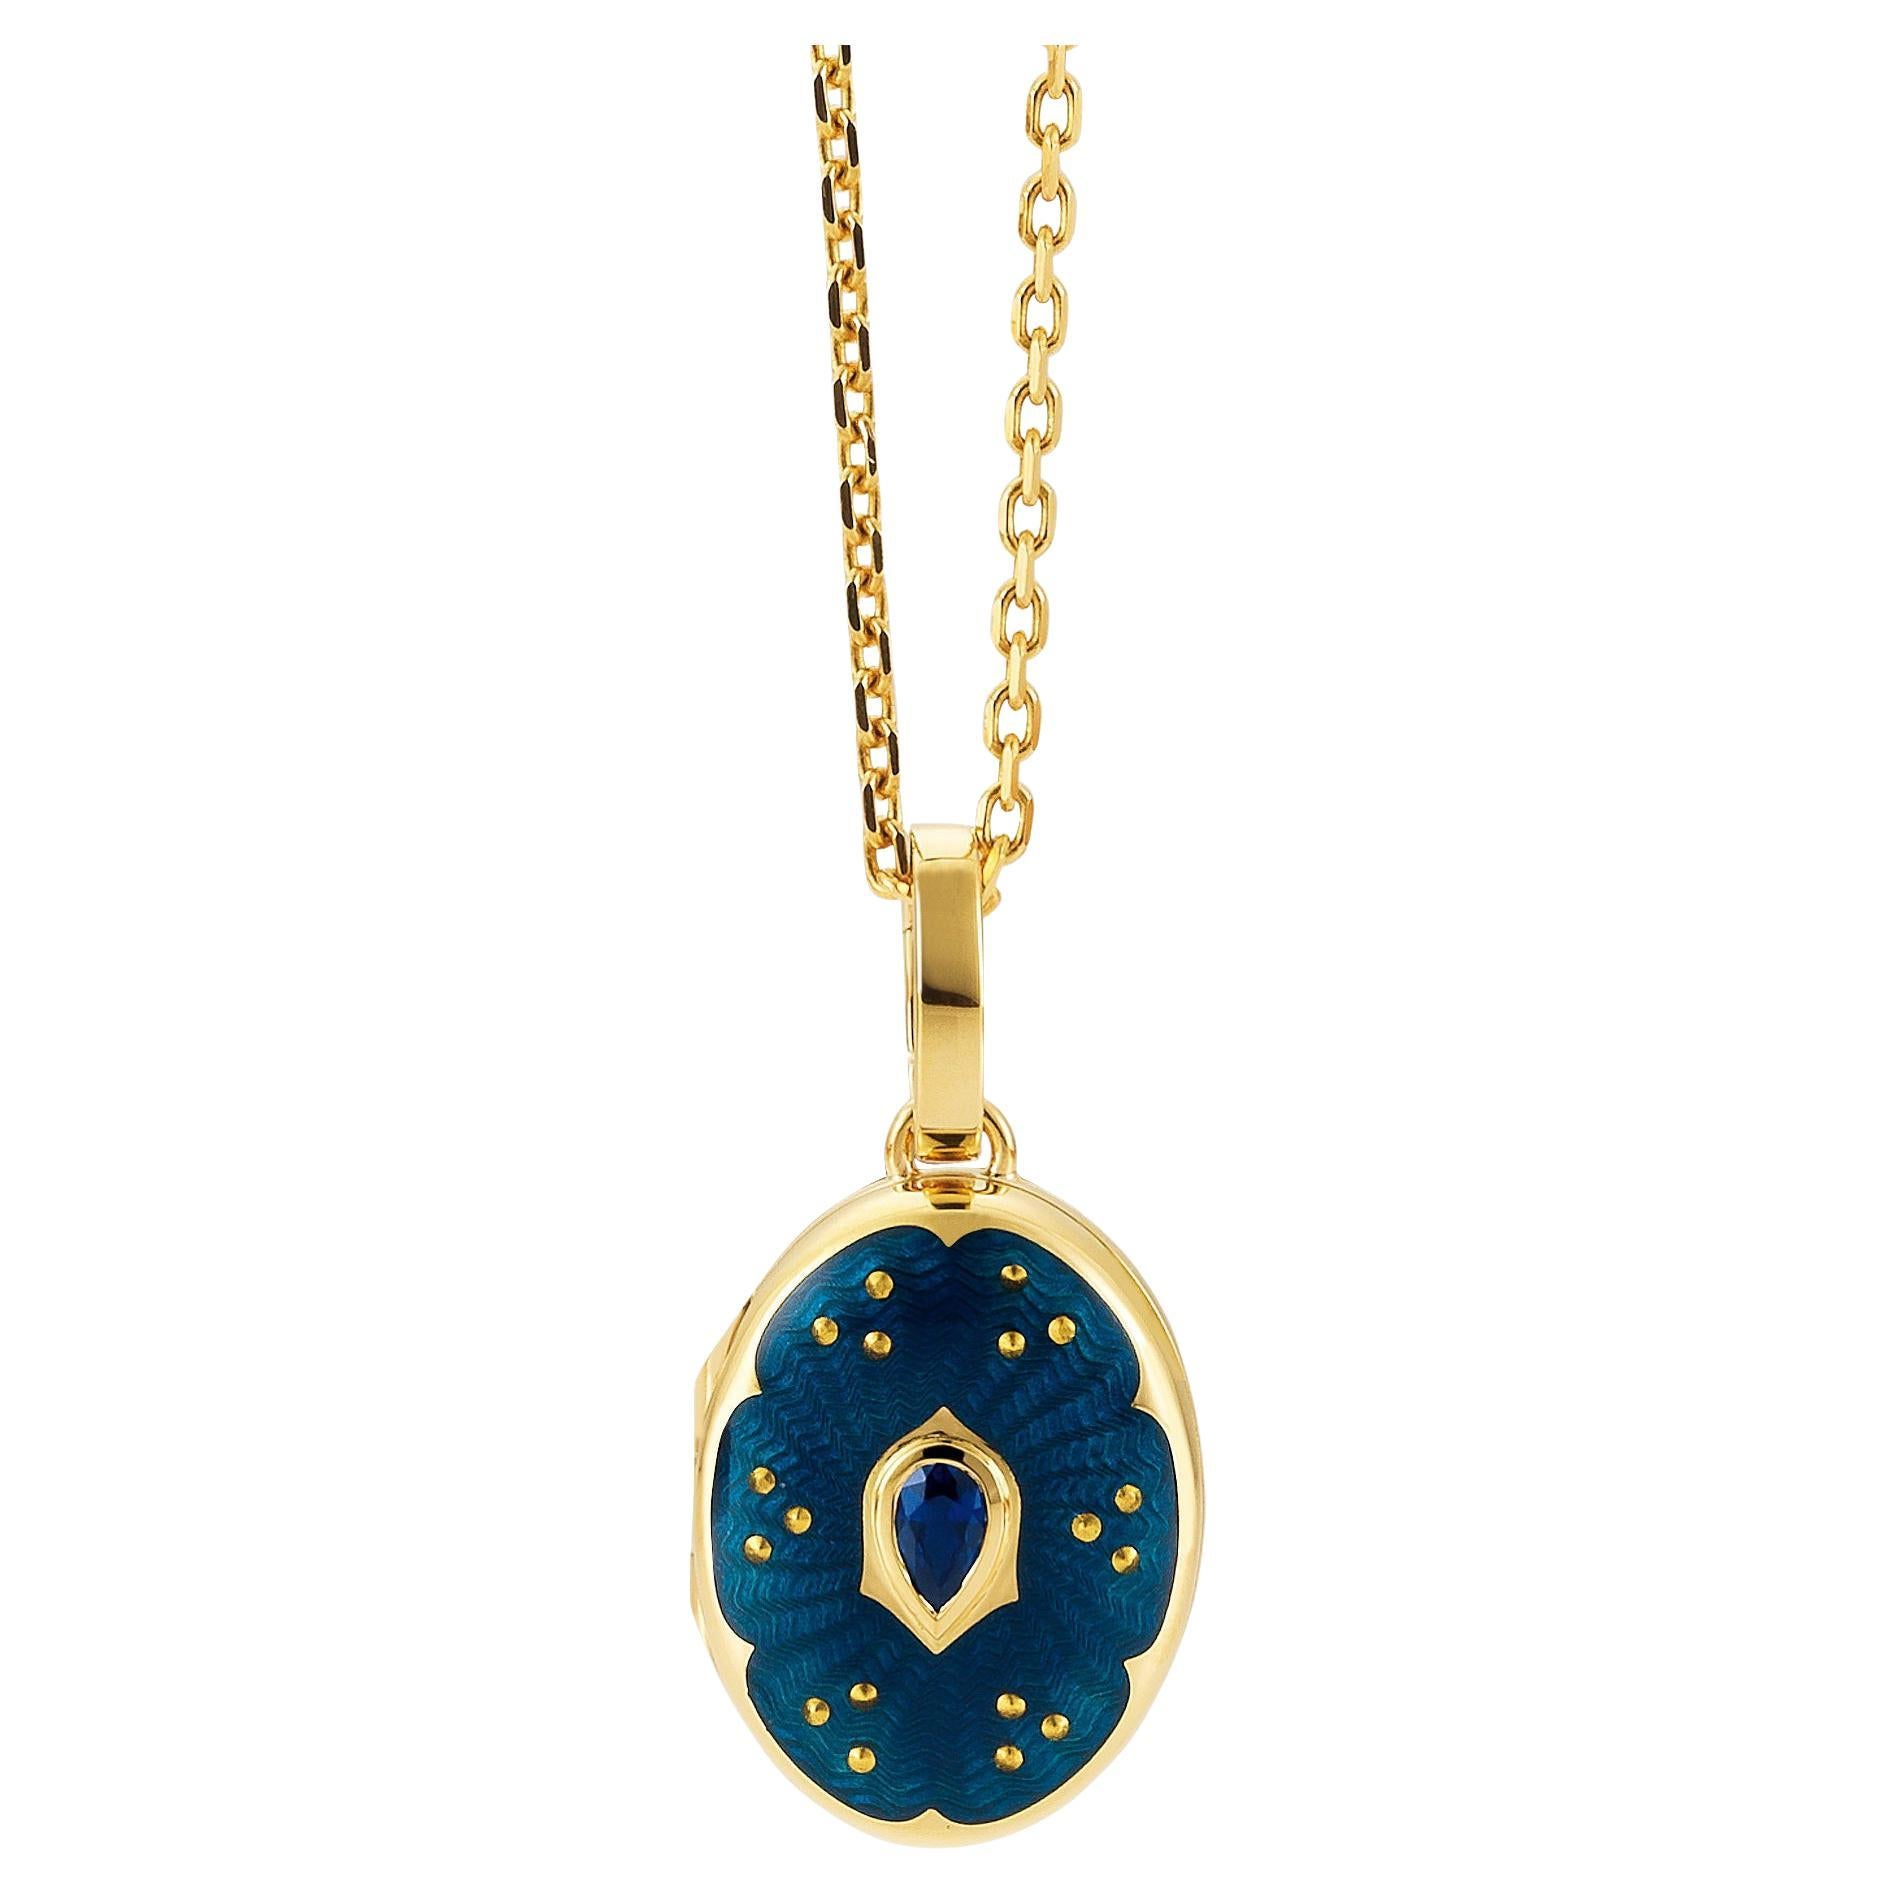 Oval locket pendant, 18k yellow gold, Victoria Collection by Victor Mayer, petrol blue vitreous enamel with paillon inlays, 1 facetted pear shaped sapphire, measurements app. 20.0 mm x 15.0 mm

About the creator Victor Mayer
Victor Mayer is